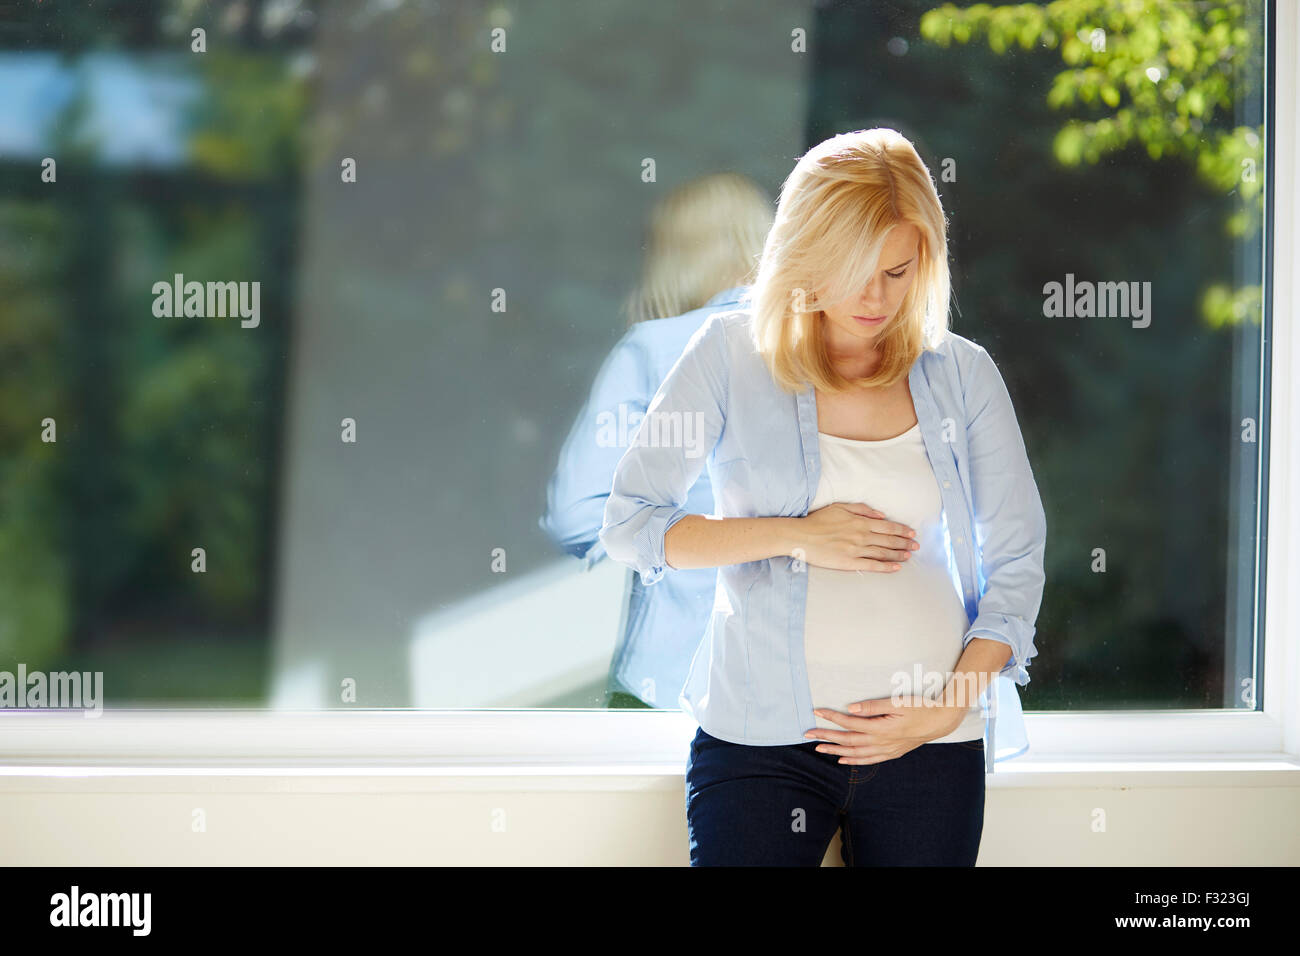 Worried pregnant woman Stock Photo